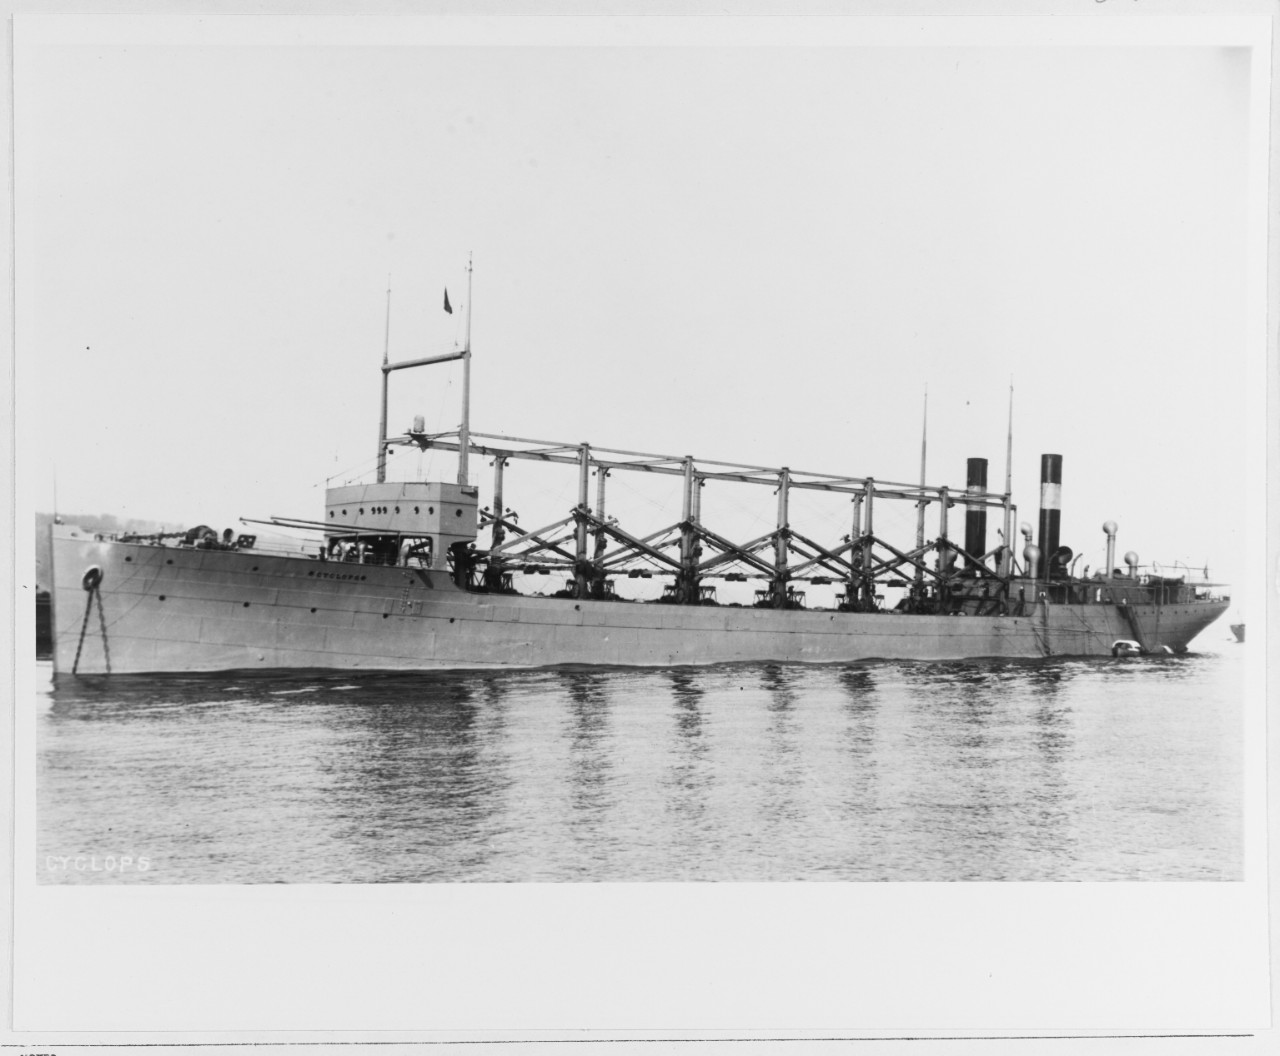 Black and White photograph of a ship on the water